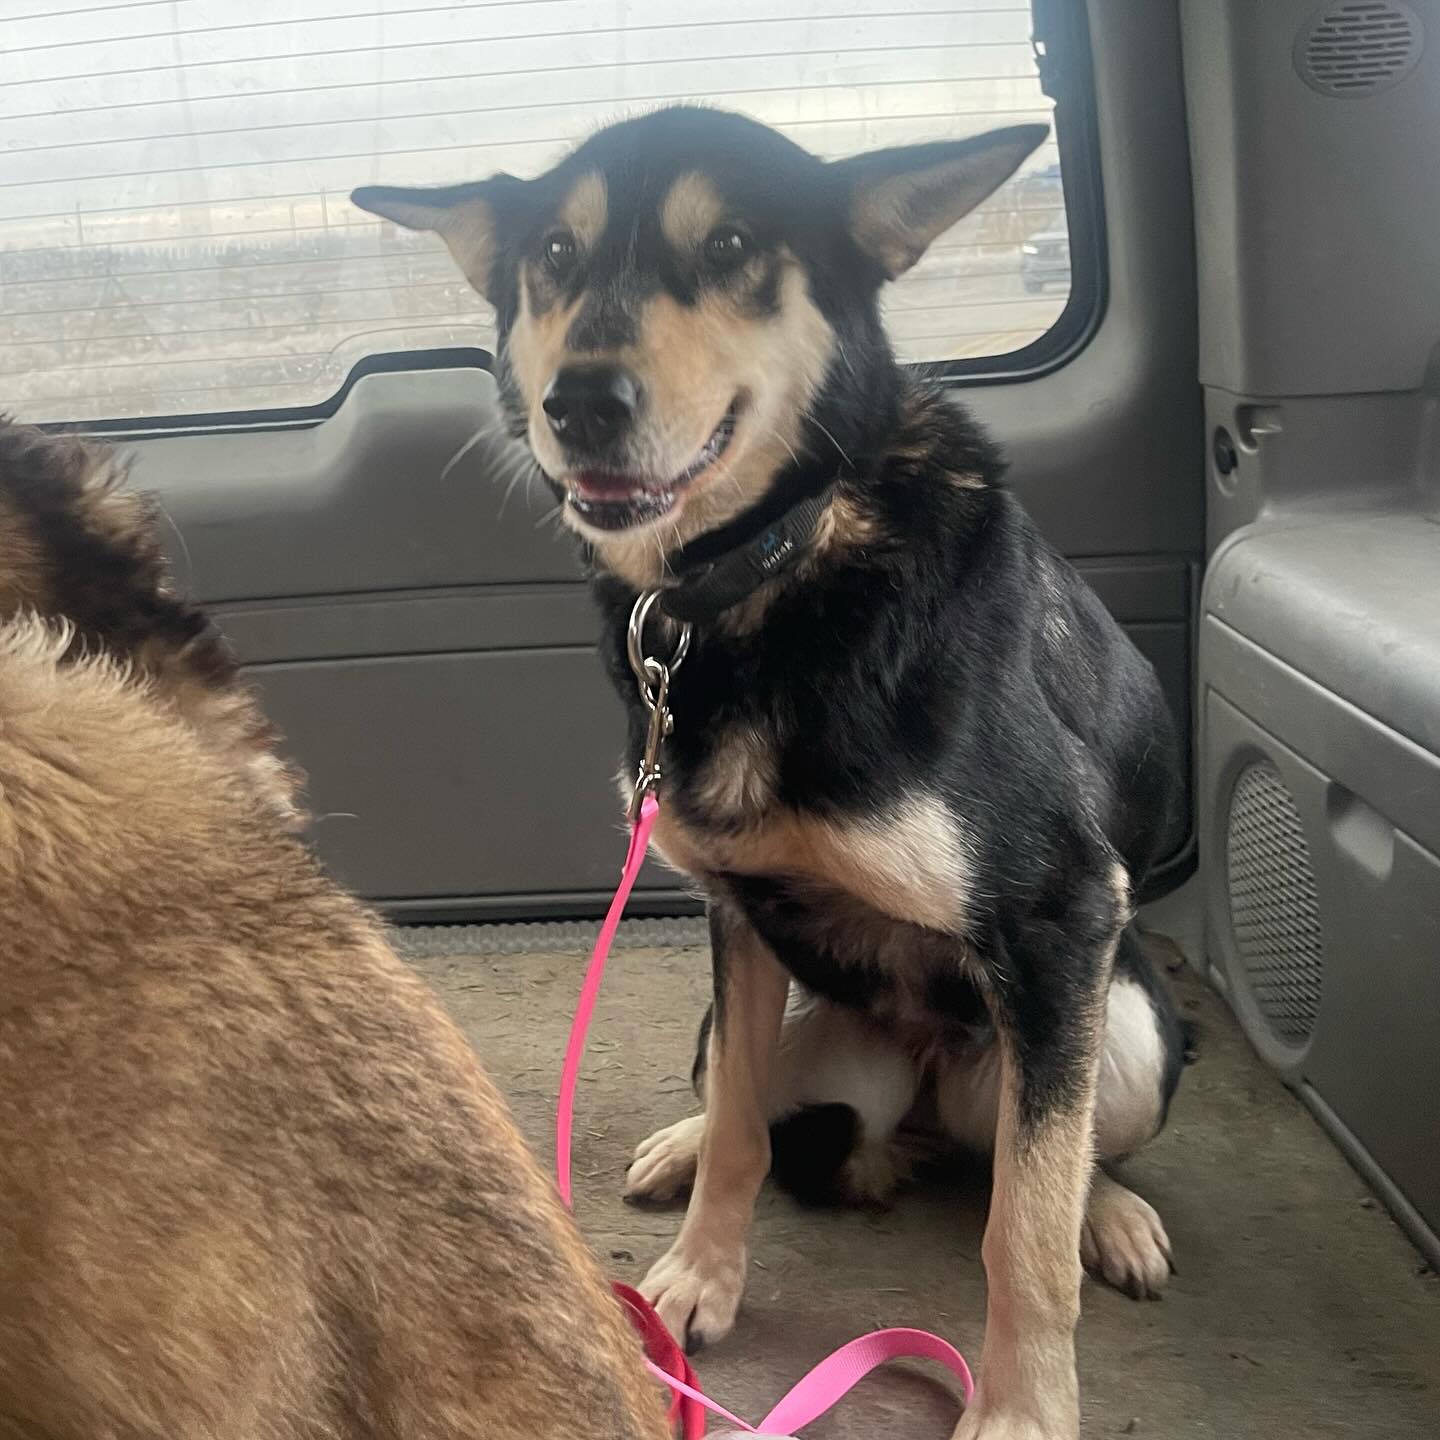 5 sleddies rescued and on their way to fosters 💜

I love what I do! 🥰 thank you to the amazing mushers who surrendered them to us, you know who you are 🙏💕 I